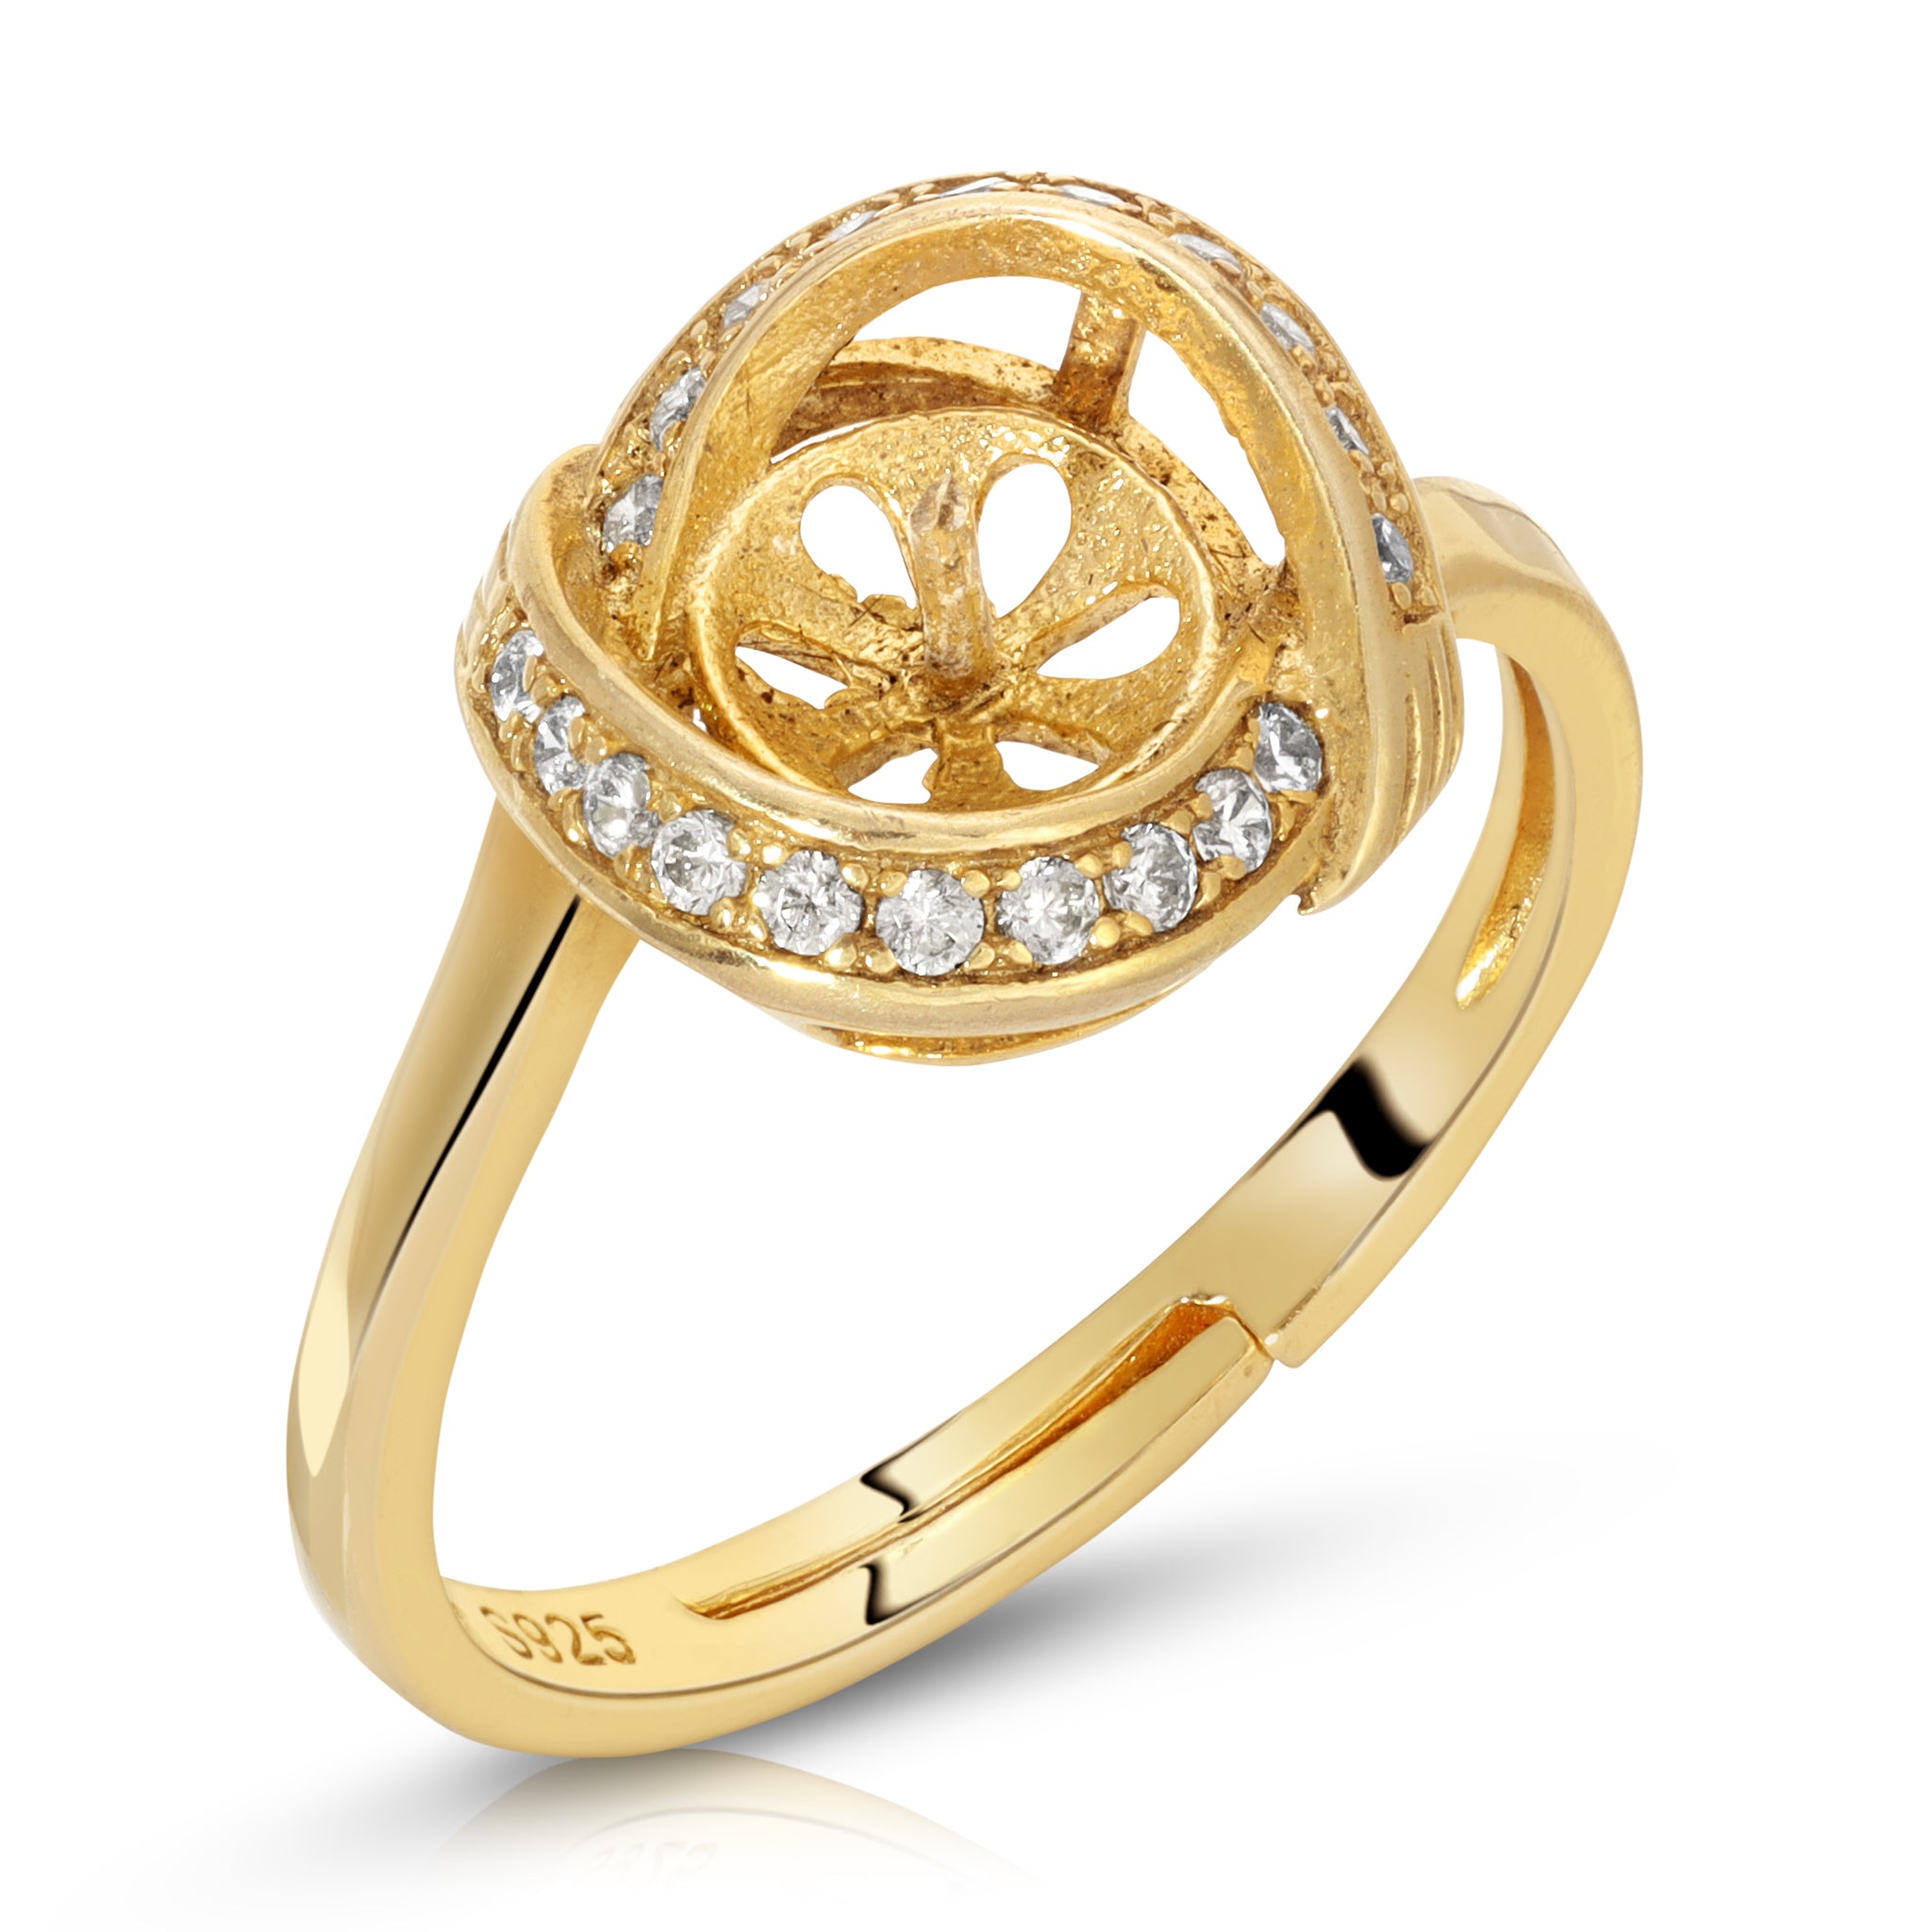 Gold Ring with a Pearl and Diamonds - Maleku Jewelry